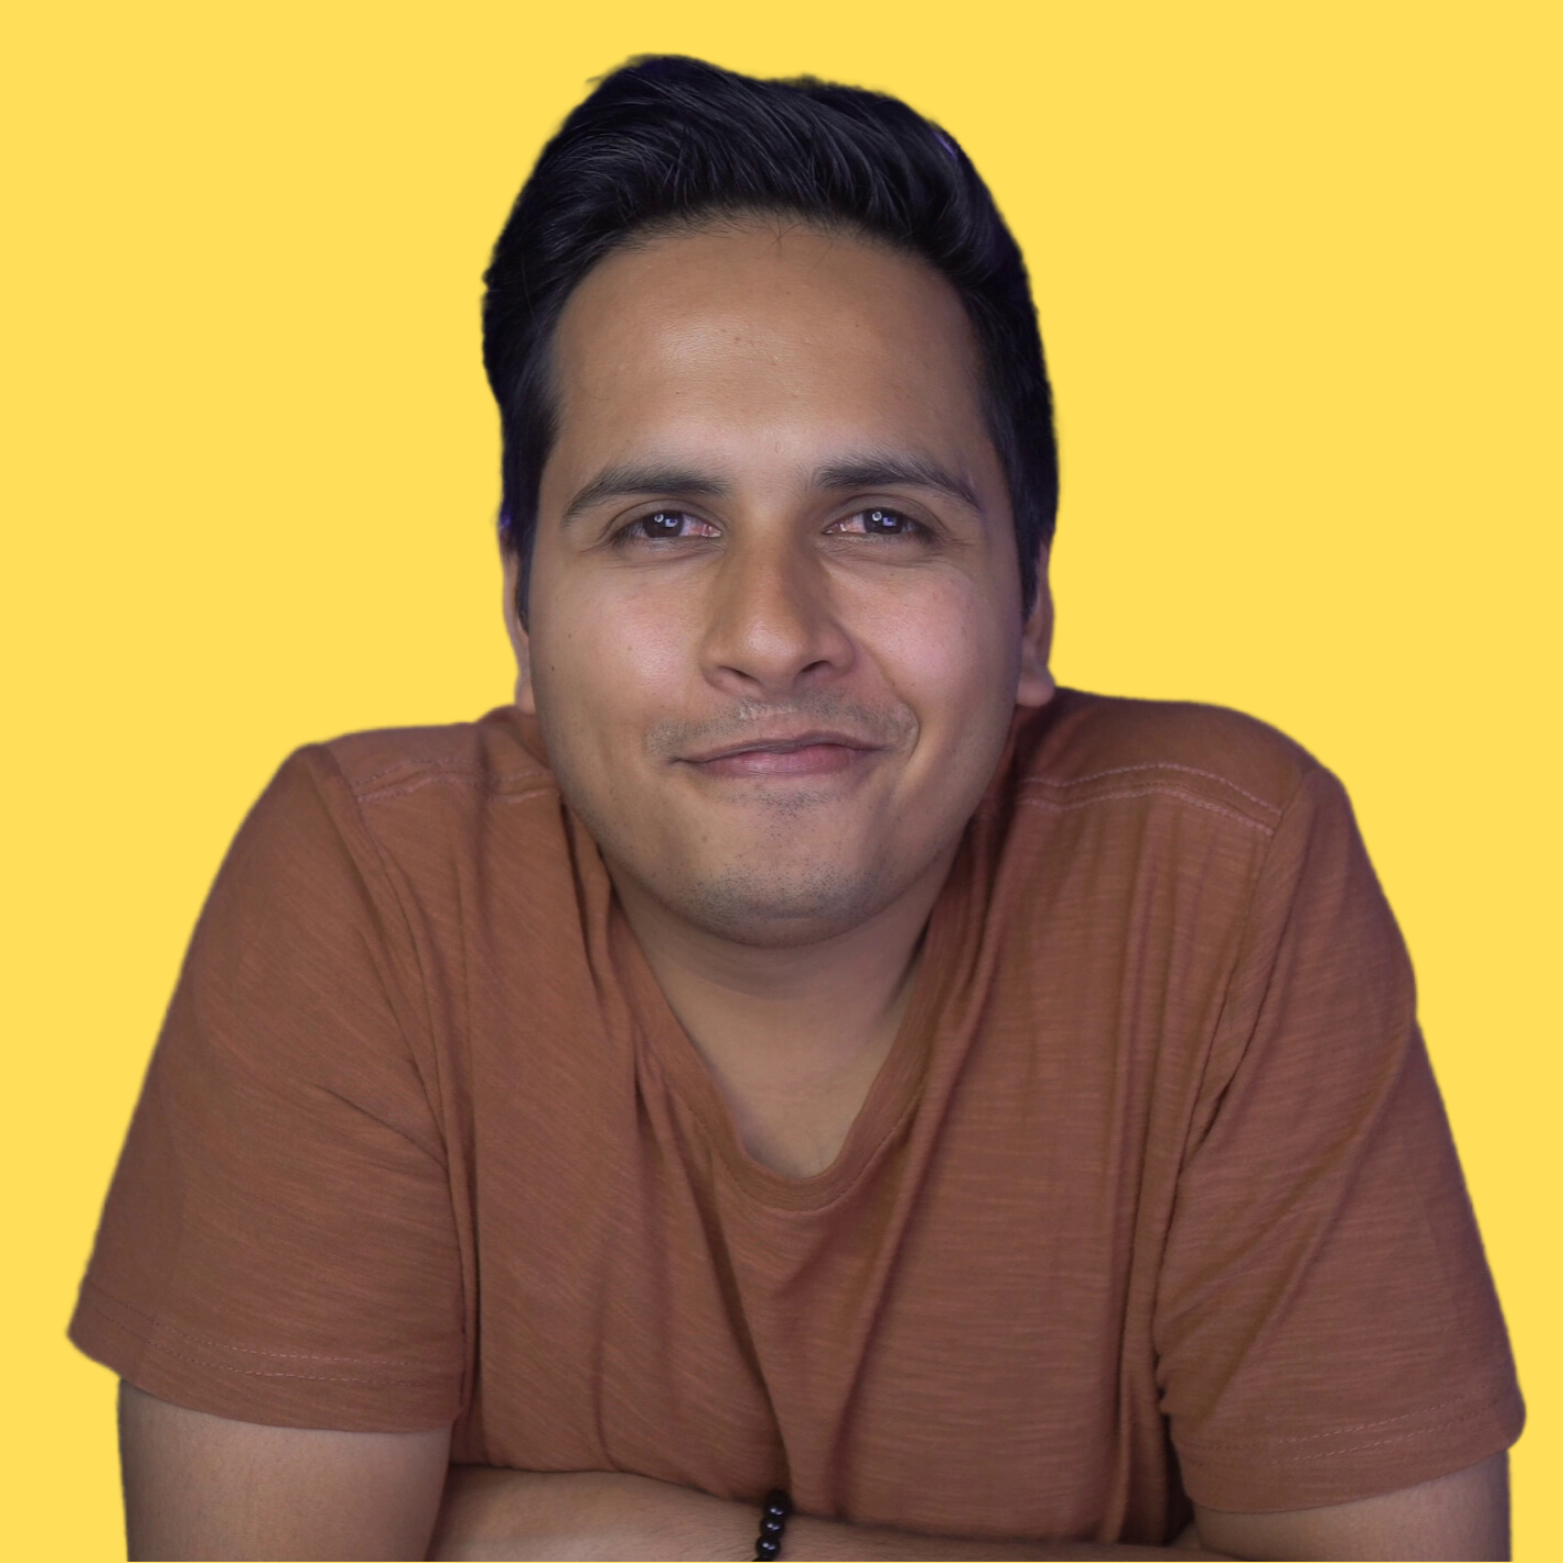 Exclusive Online & Crypto Security Course by Shivam Chhuneja